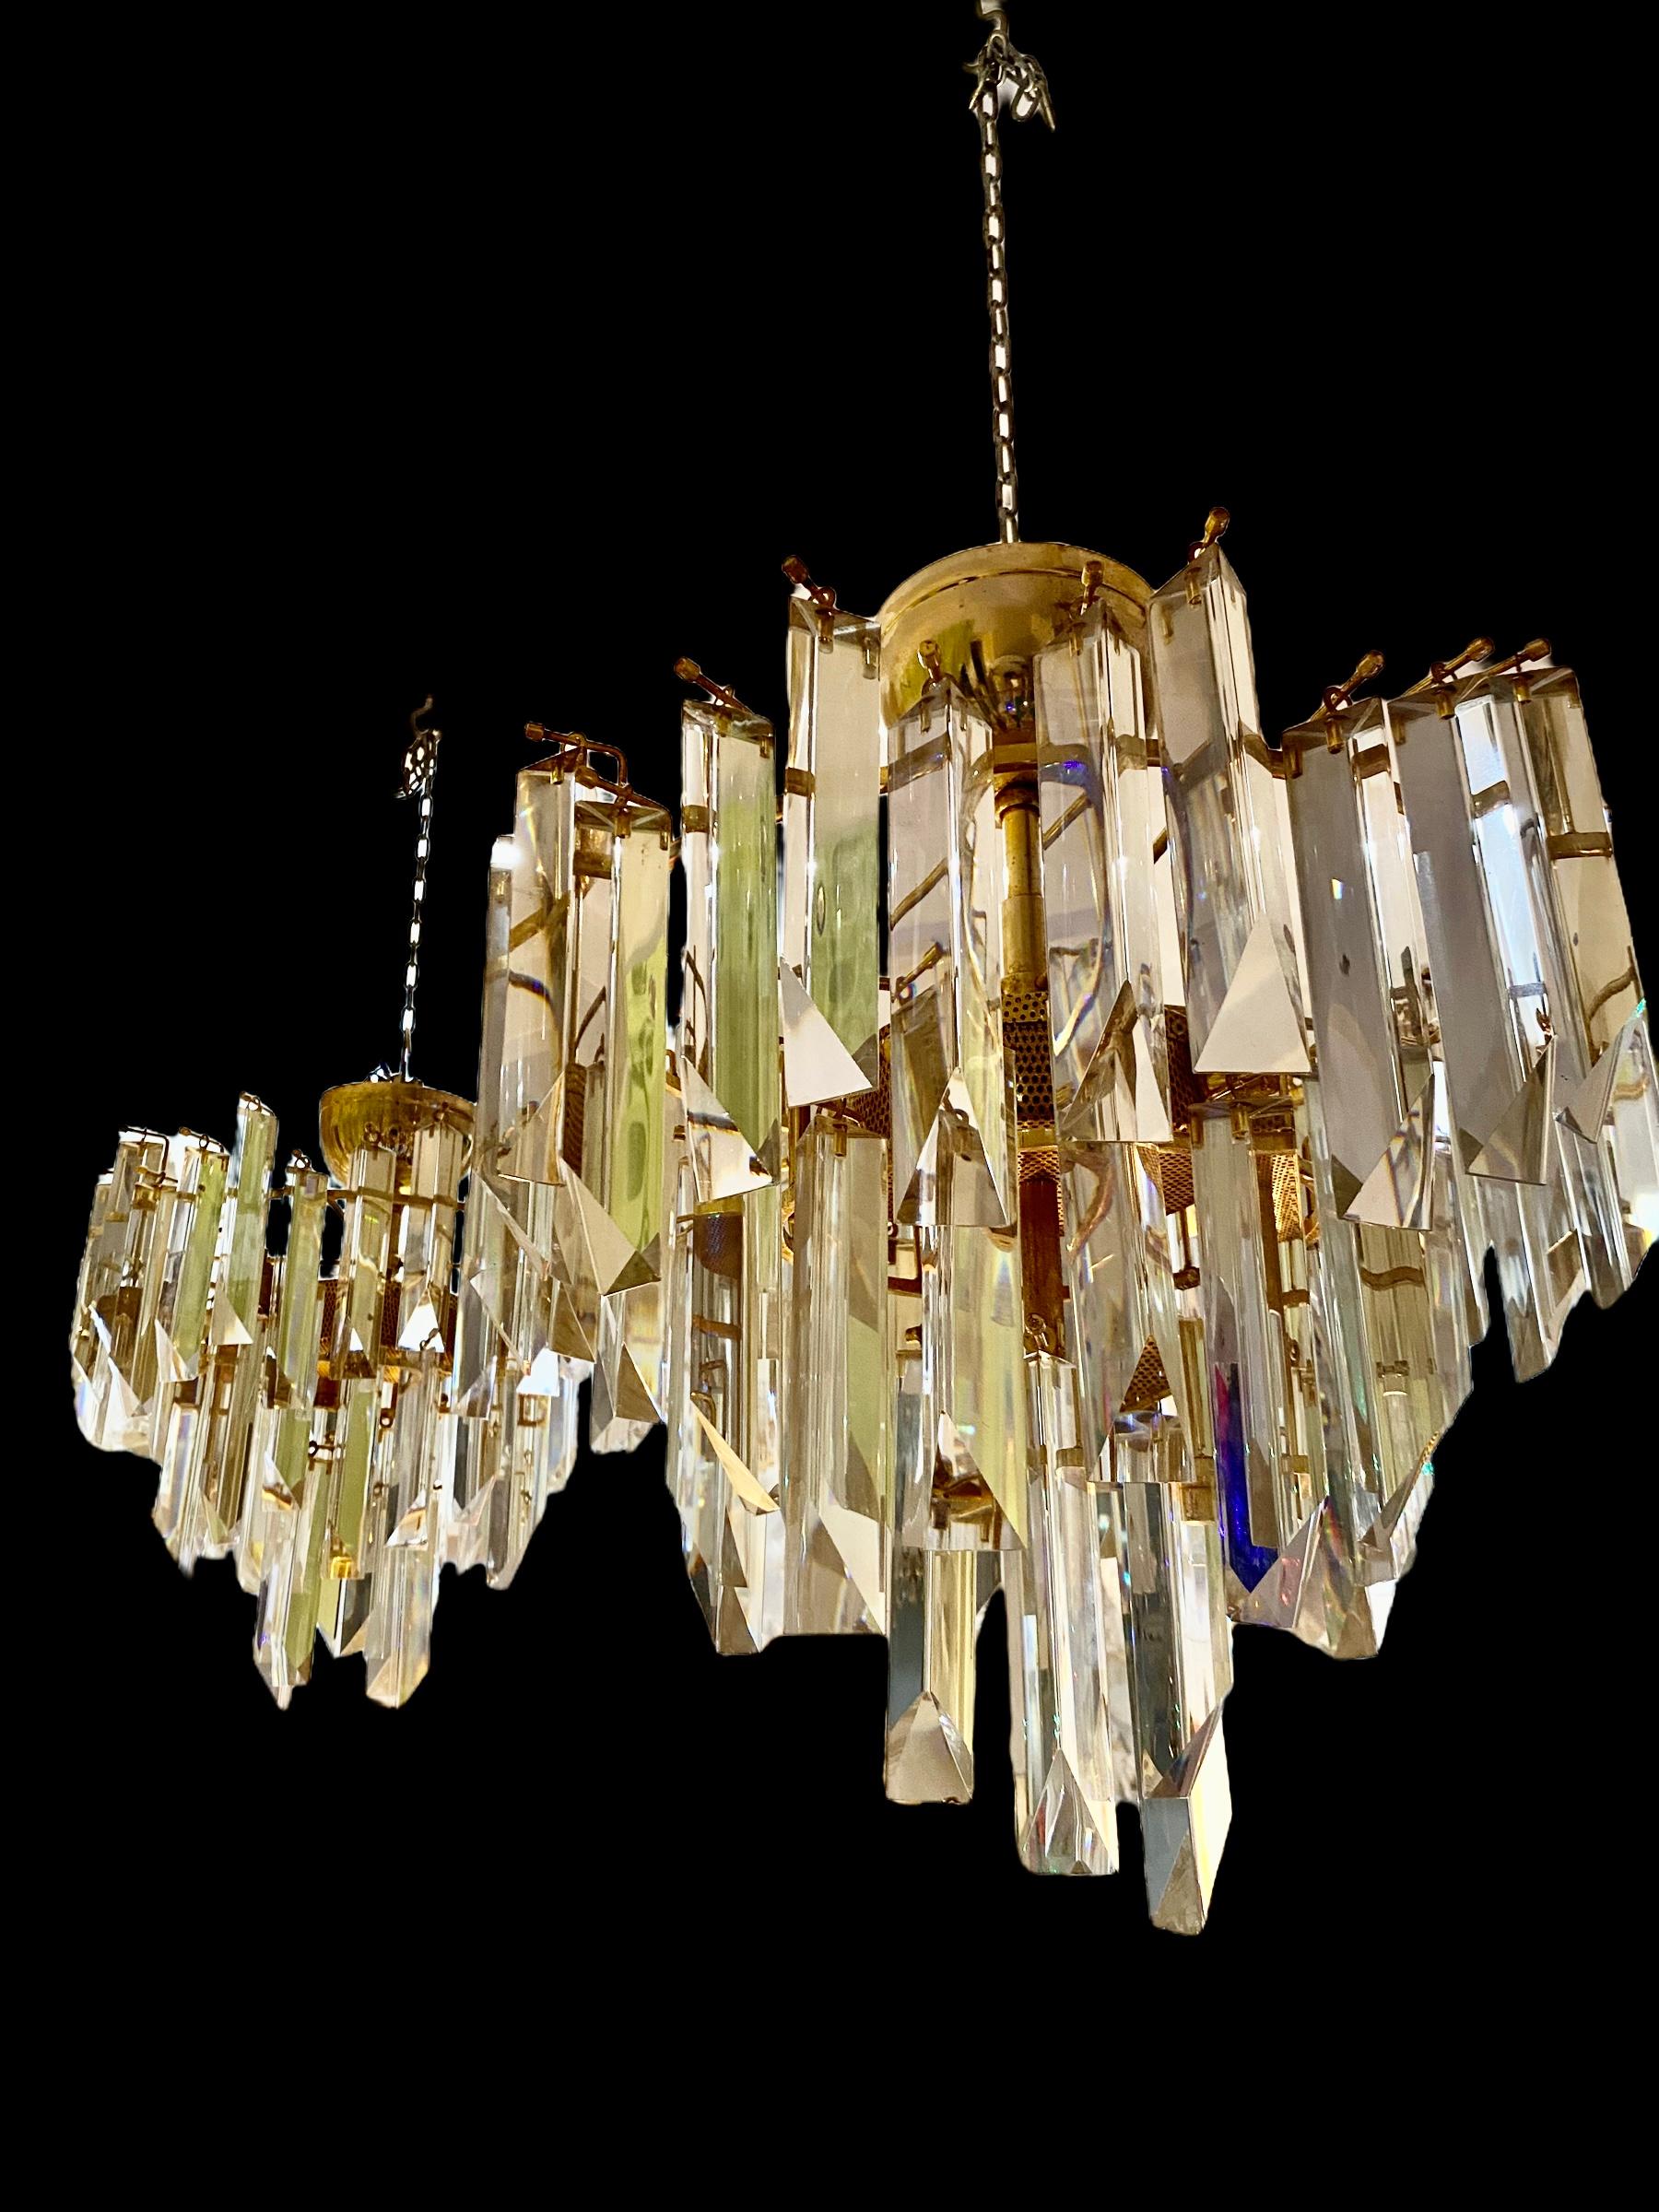 Exceptional Venini chandelier with large Murano glass with gilded gold structure. The design and the quality of the glass make this piece the best of Italian design.
This unique chandelier by Venini in murano glass is exceptional.
discount shipping